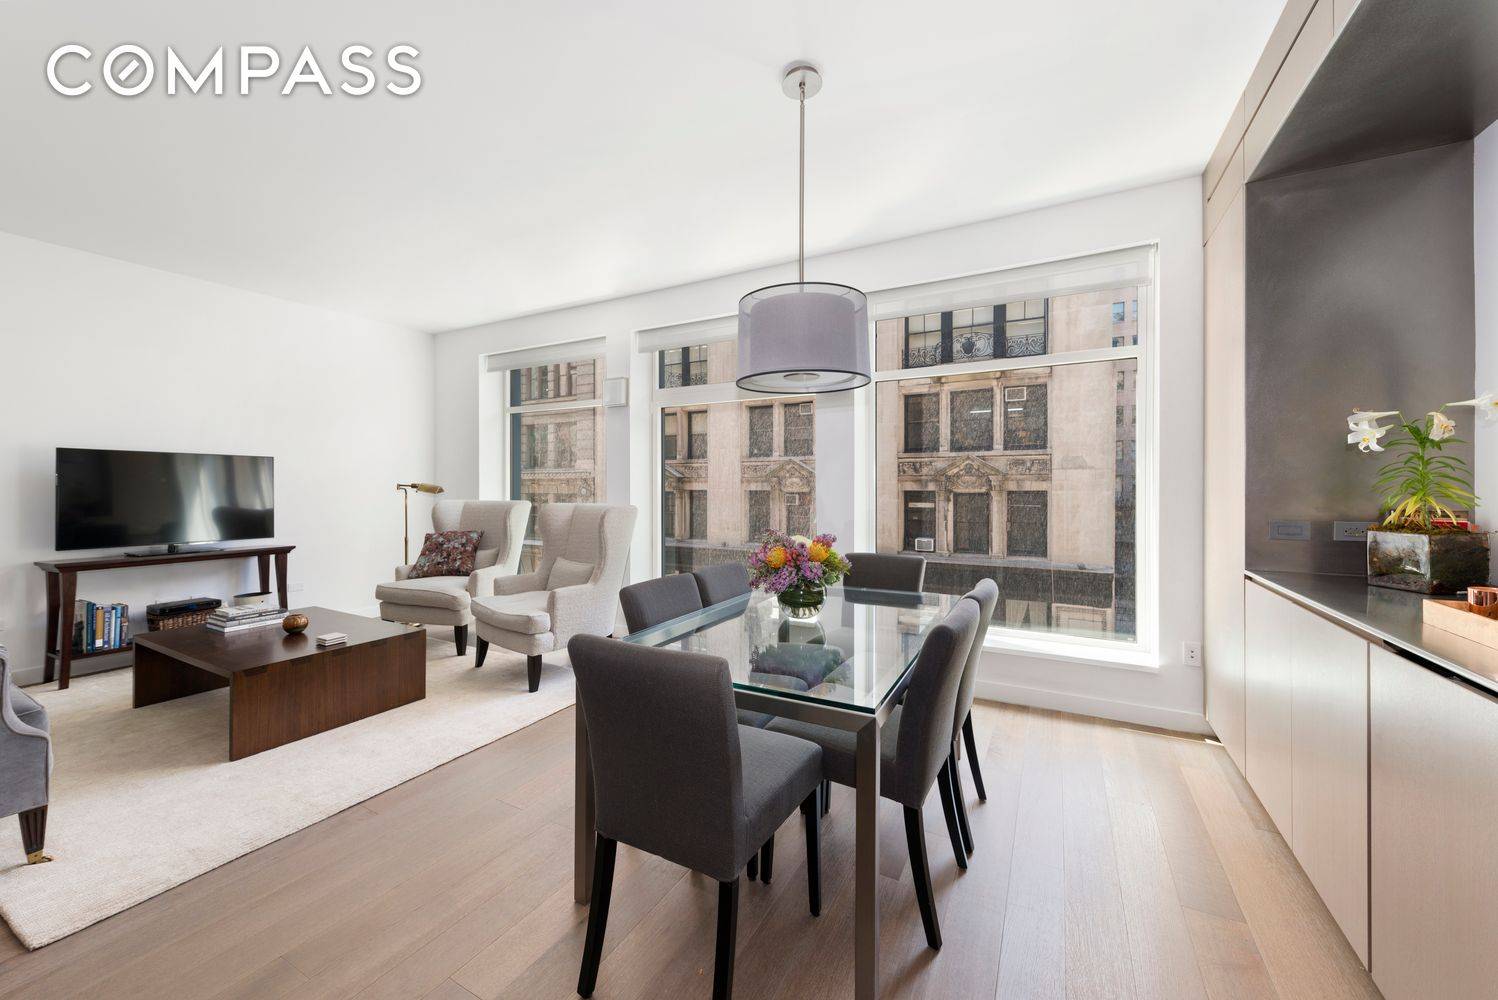 This full floor two bedroom two bath stylish home is located in the heart of the vibrant, fun and convenient Flatiron district.